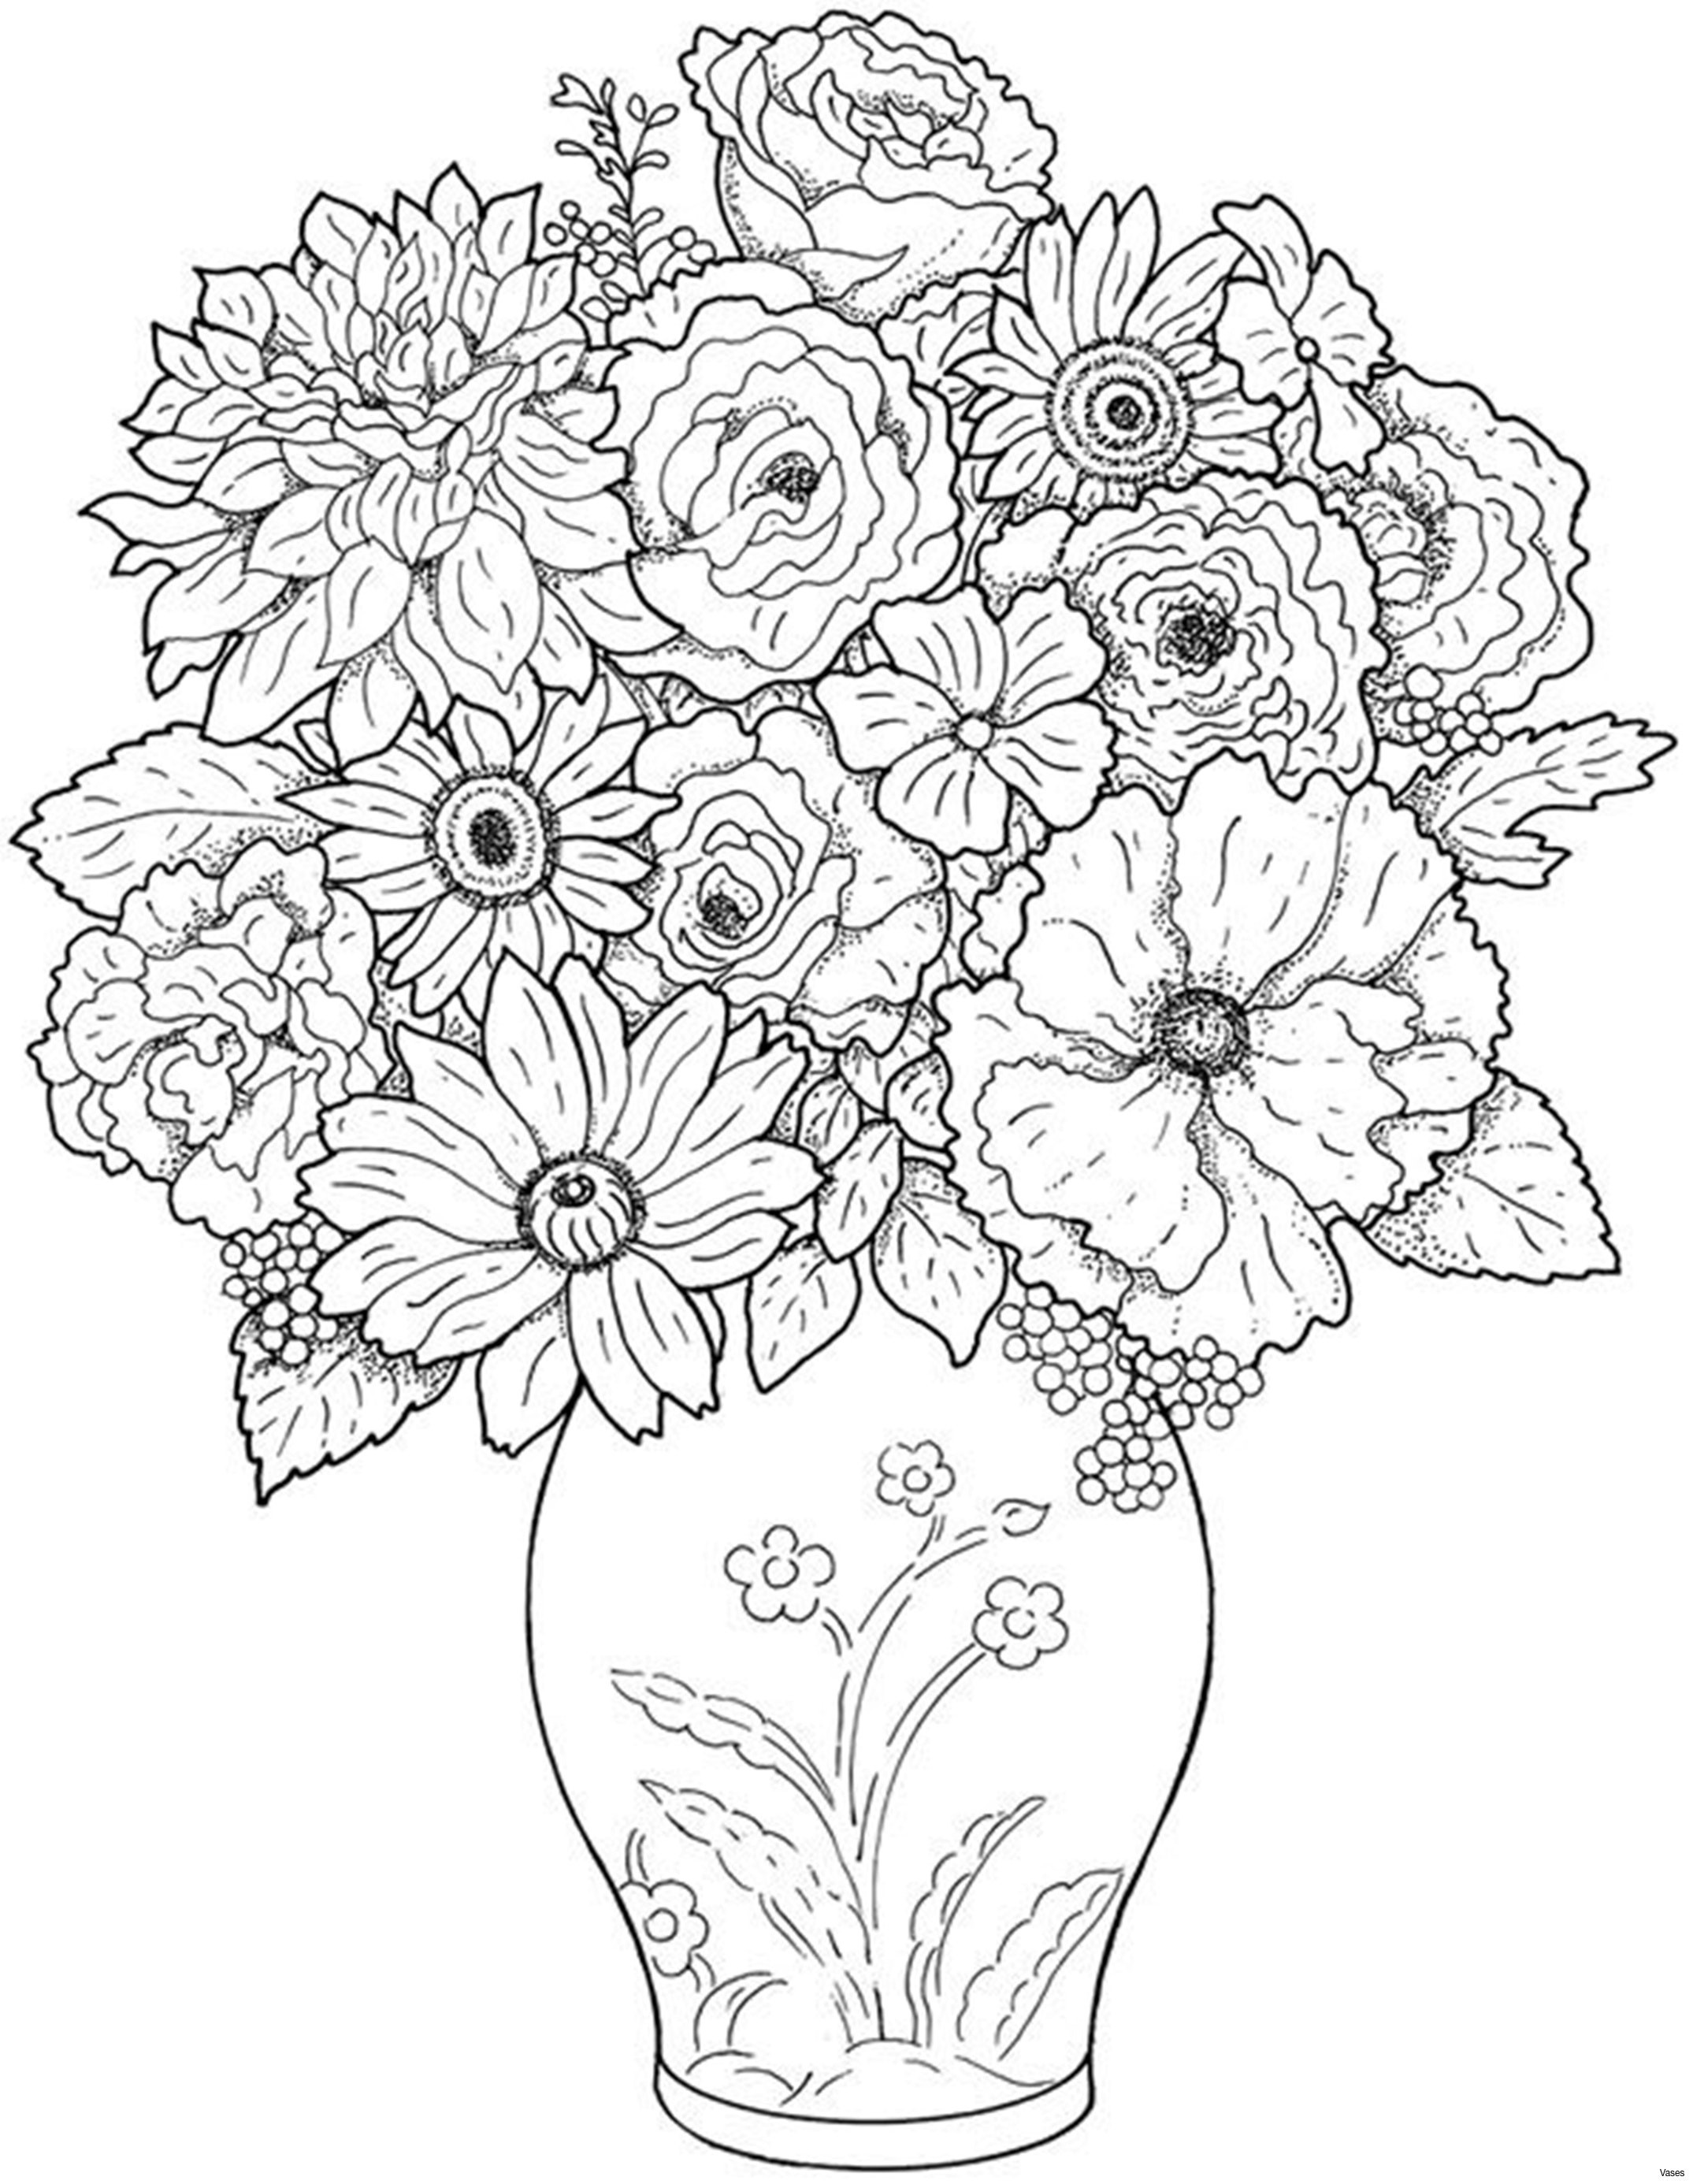 14 attractive Black Floral Vase 2022 free download black floral vase of new gray flowers yepigames me pertaining to cool vases flower vase coloring page pages flowers in a top i 0d